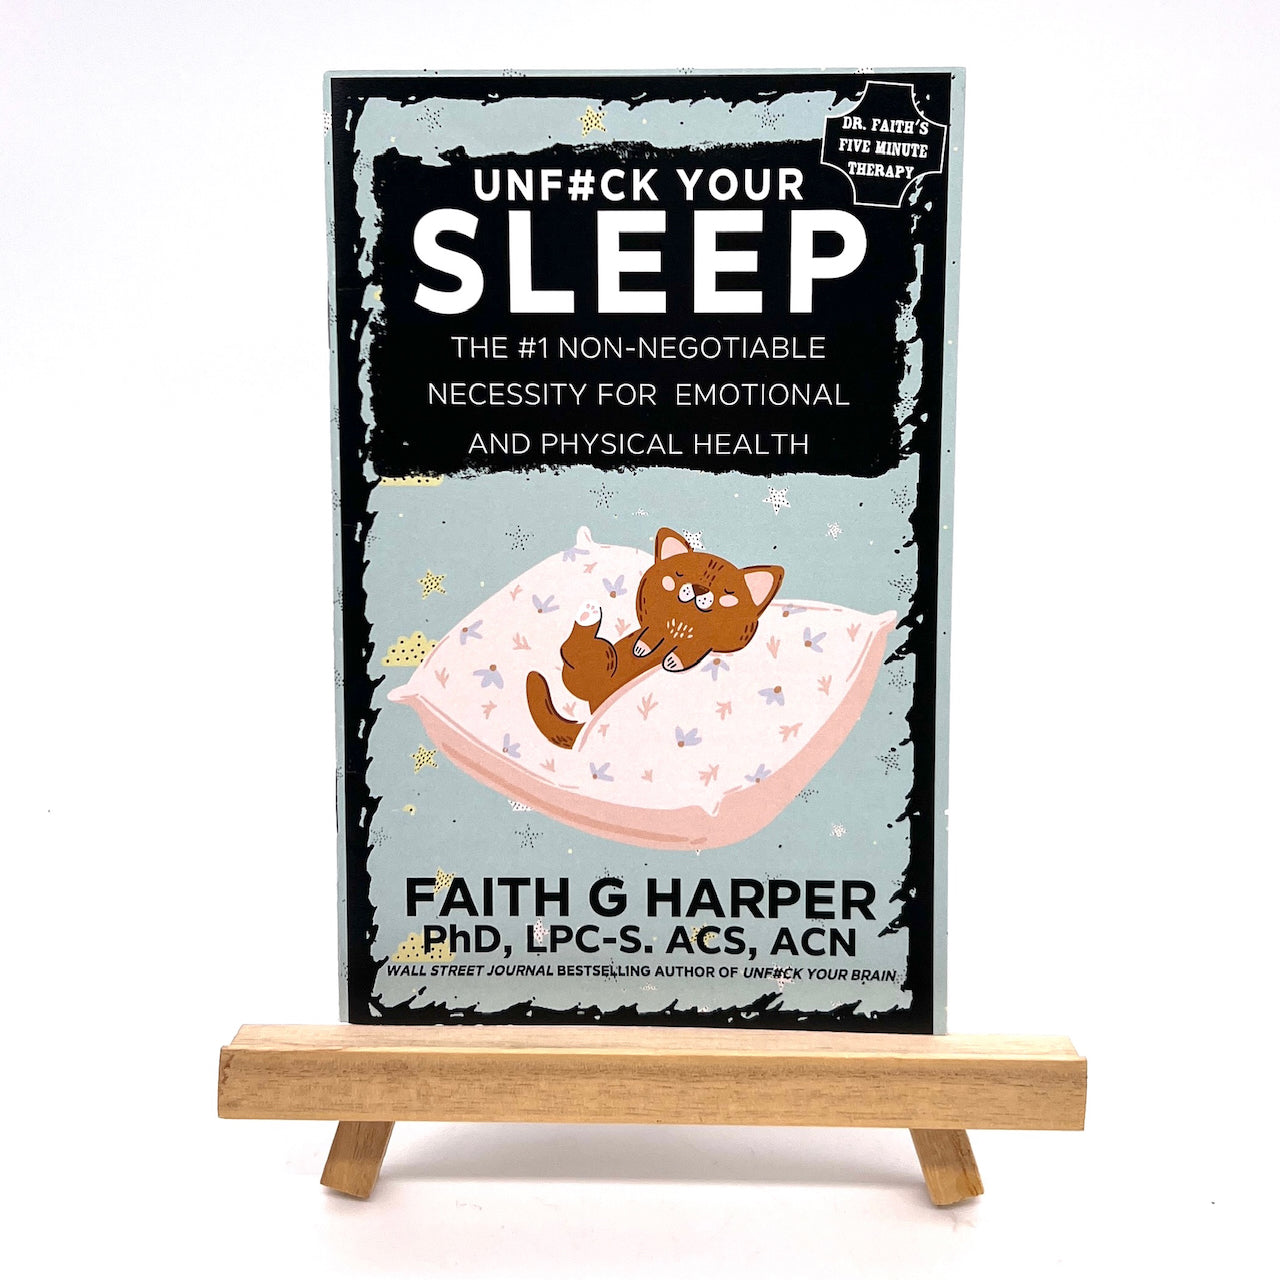 Book cover of Unfuck Your Sleep: The #1 Non-Negotiable Necessity for Emotional and Physical Health by Faith G Harper.